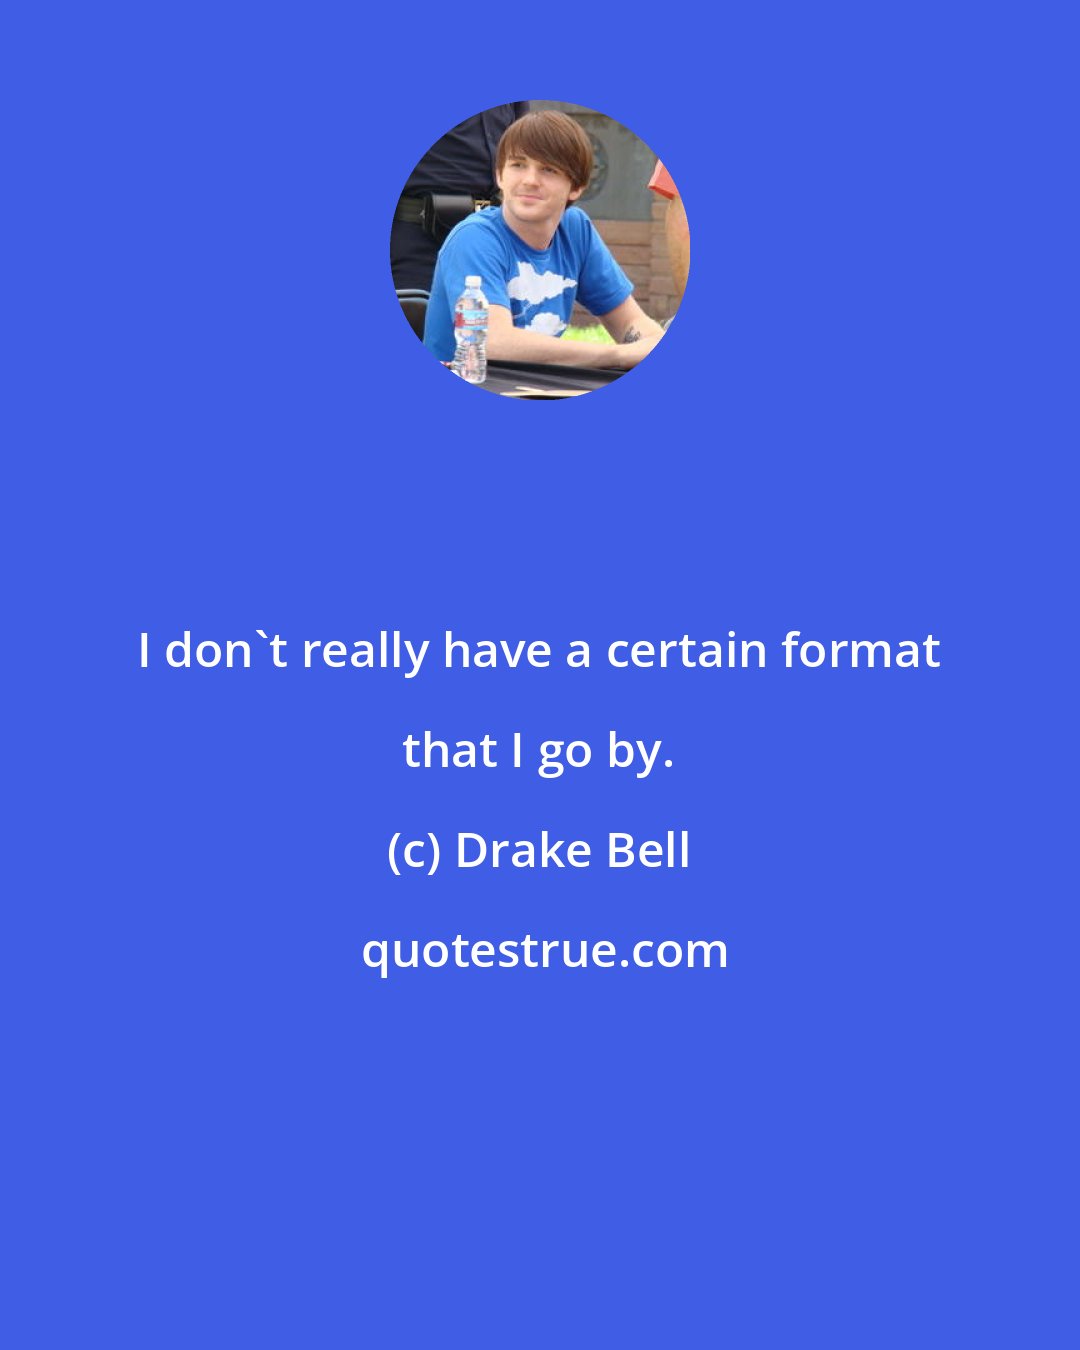 Drake Bell: I don't really have a certain format that I go by.